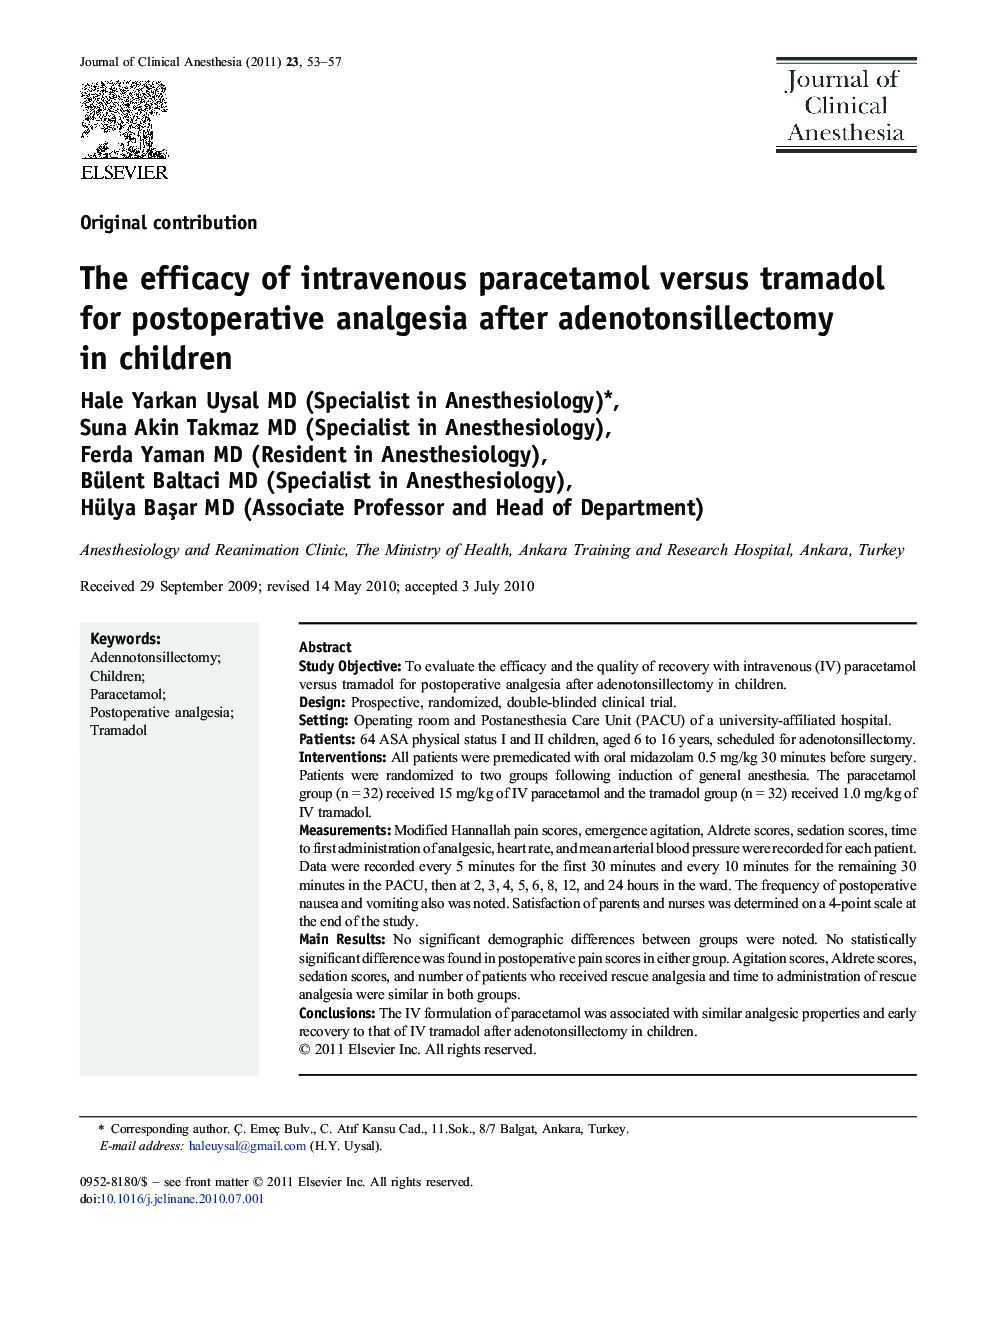 The efficacy of intravenous paracetamol versus tramadol for postoperative analgesia after adenotonsillectomy in children